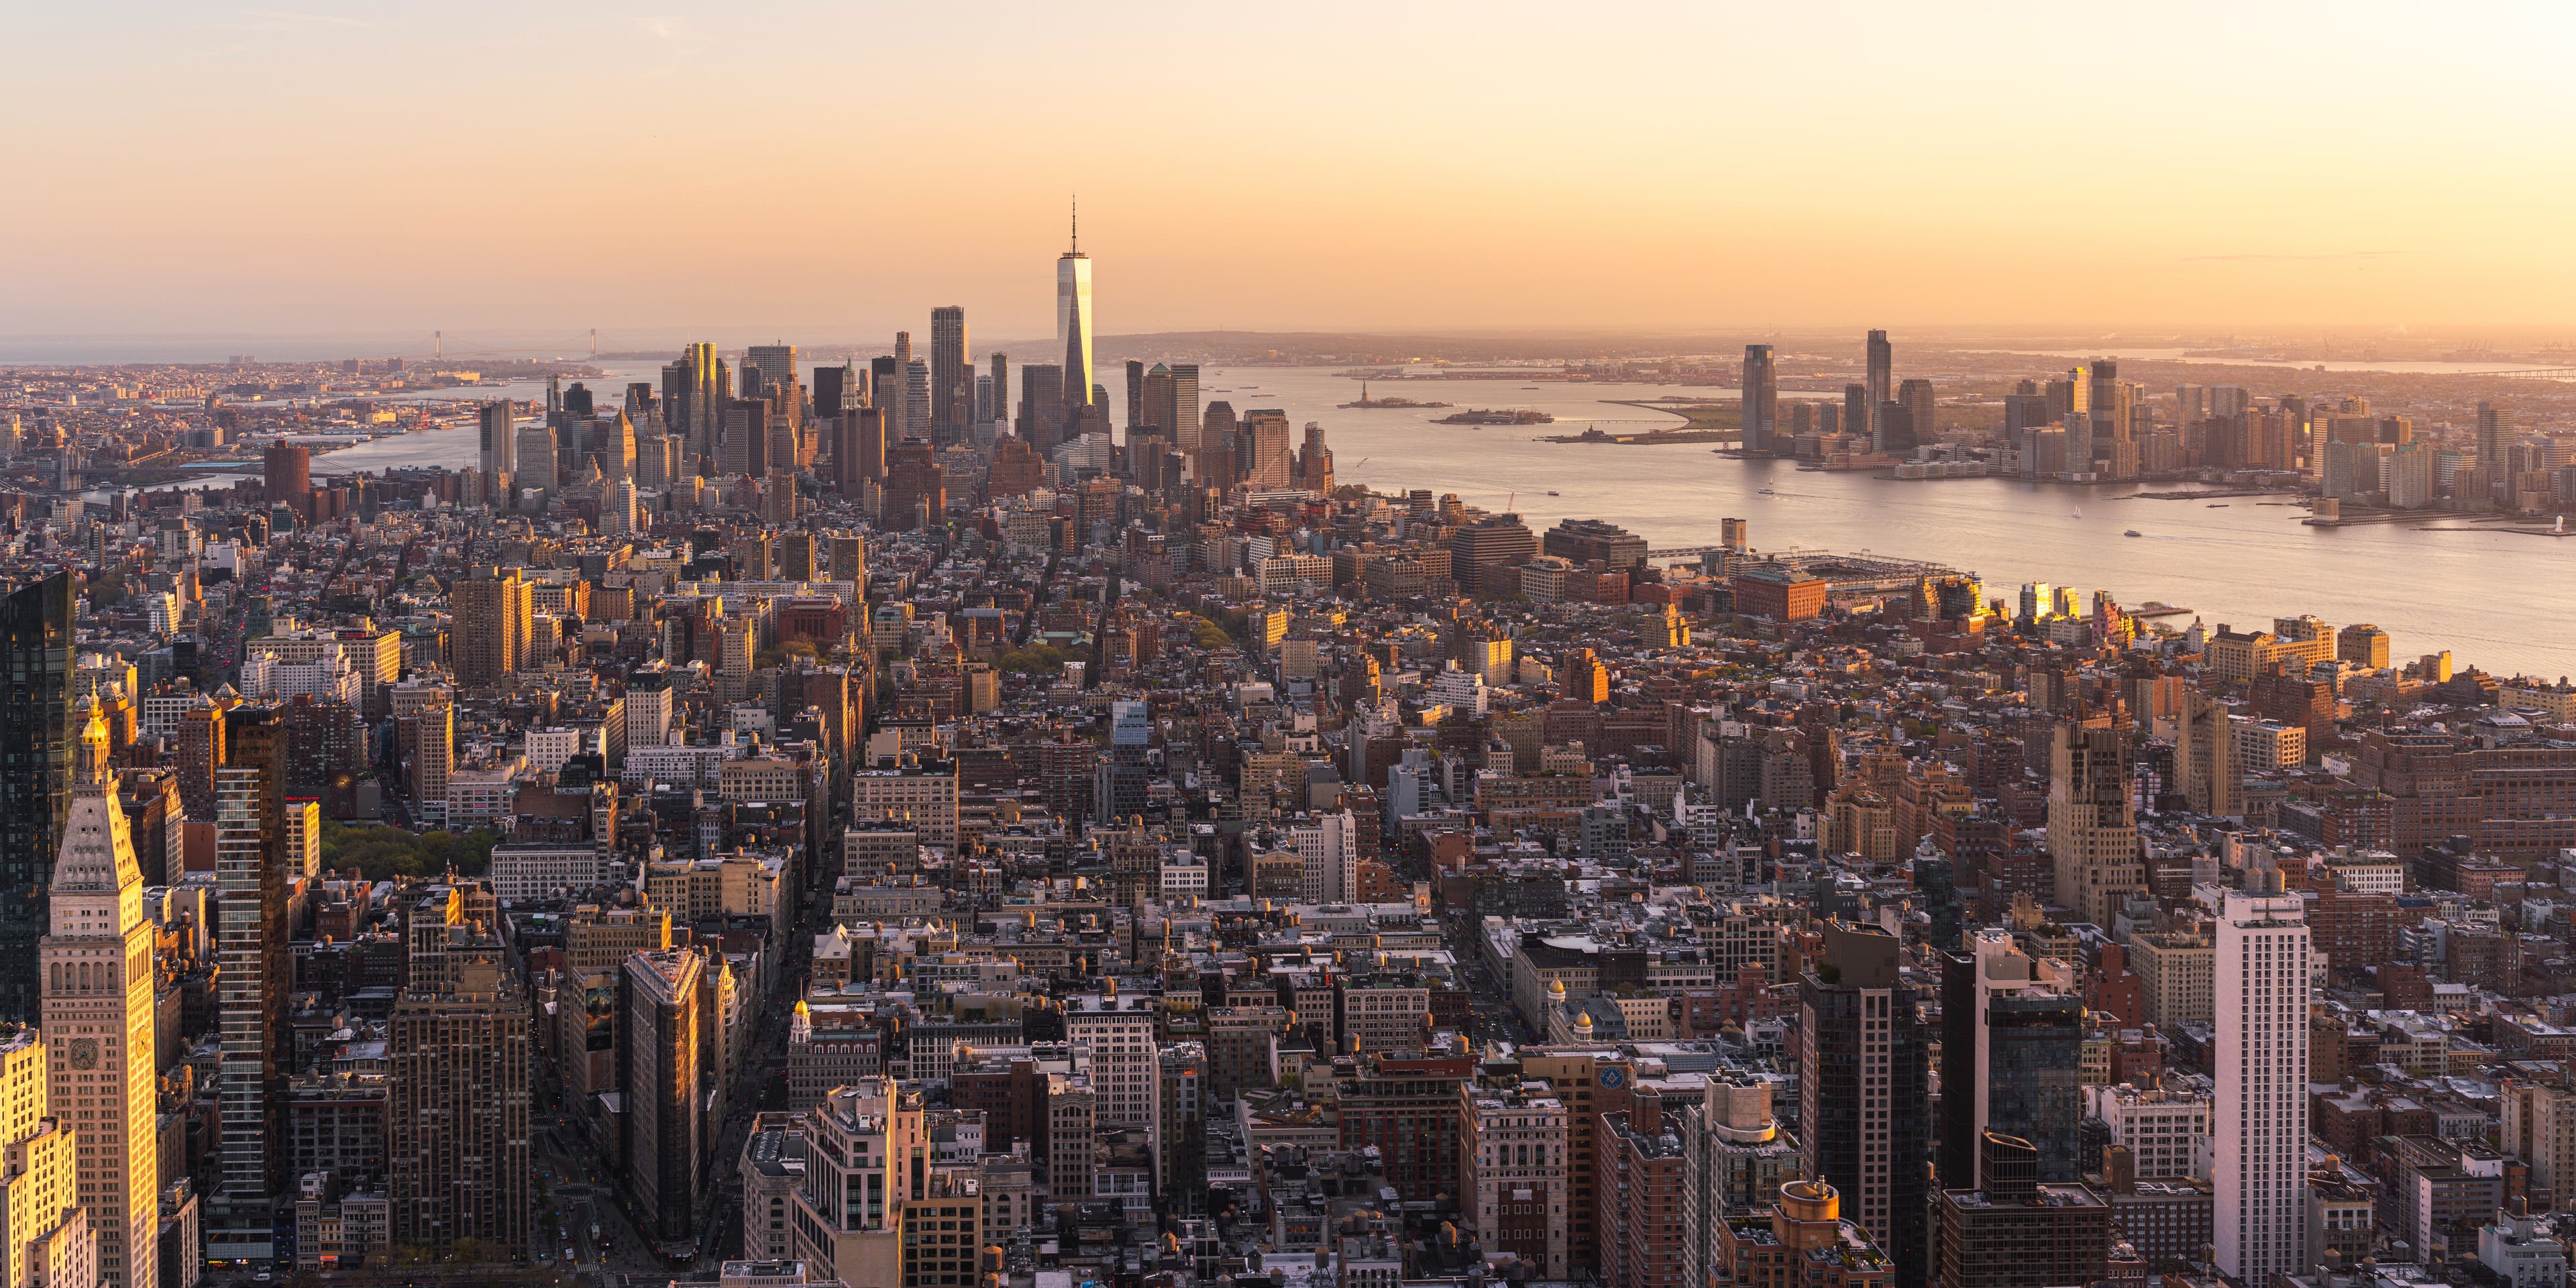 Sunset over Manhattan, high point of view. New York City, USA - stock photo